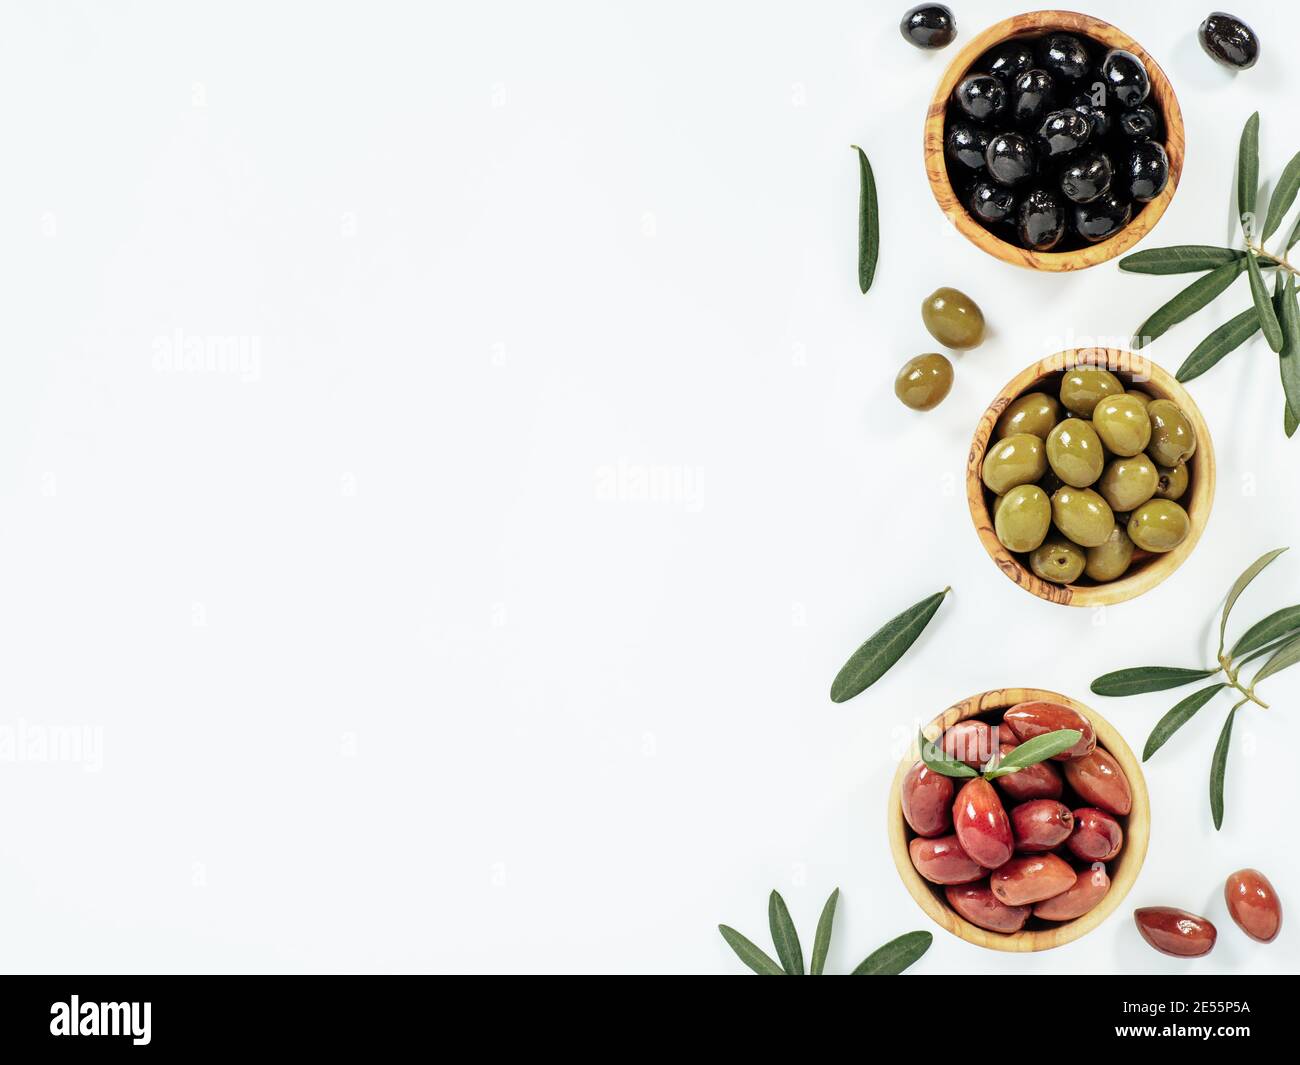 Set of green olives, black olives and red kalmata olives on white background,copy space. Top view of different olives types in bowls and leaves and branches isolated on white. Beautiful olive flat lay Stock Photo